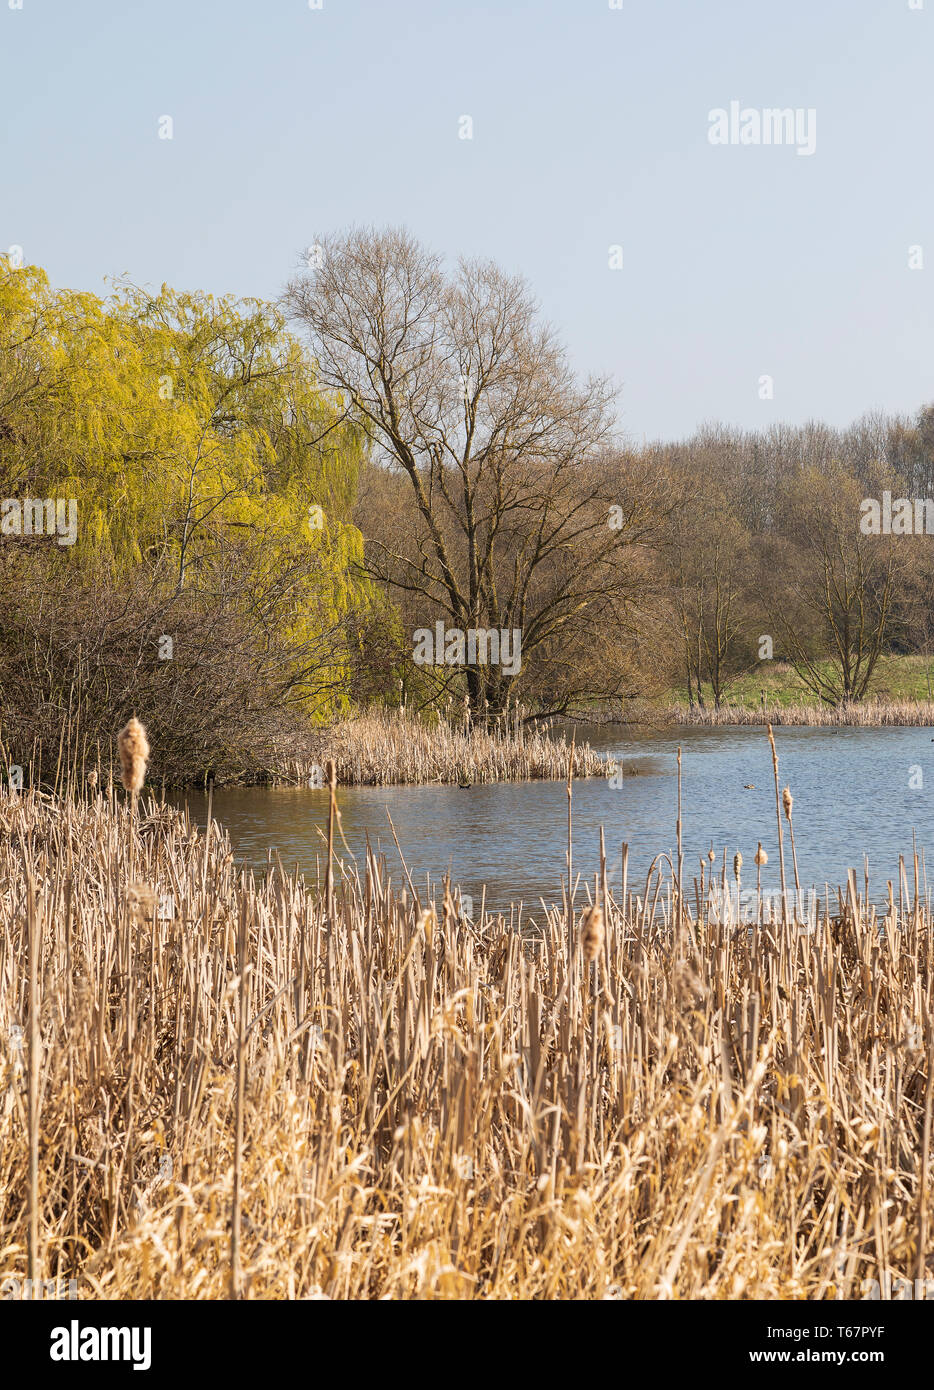 An image of lakeside trees creating a springlike feel to this lake shot on a beautiful day in Melton Mowbray, Leicestershire, England, UK. Stock Photo